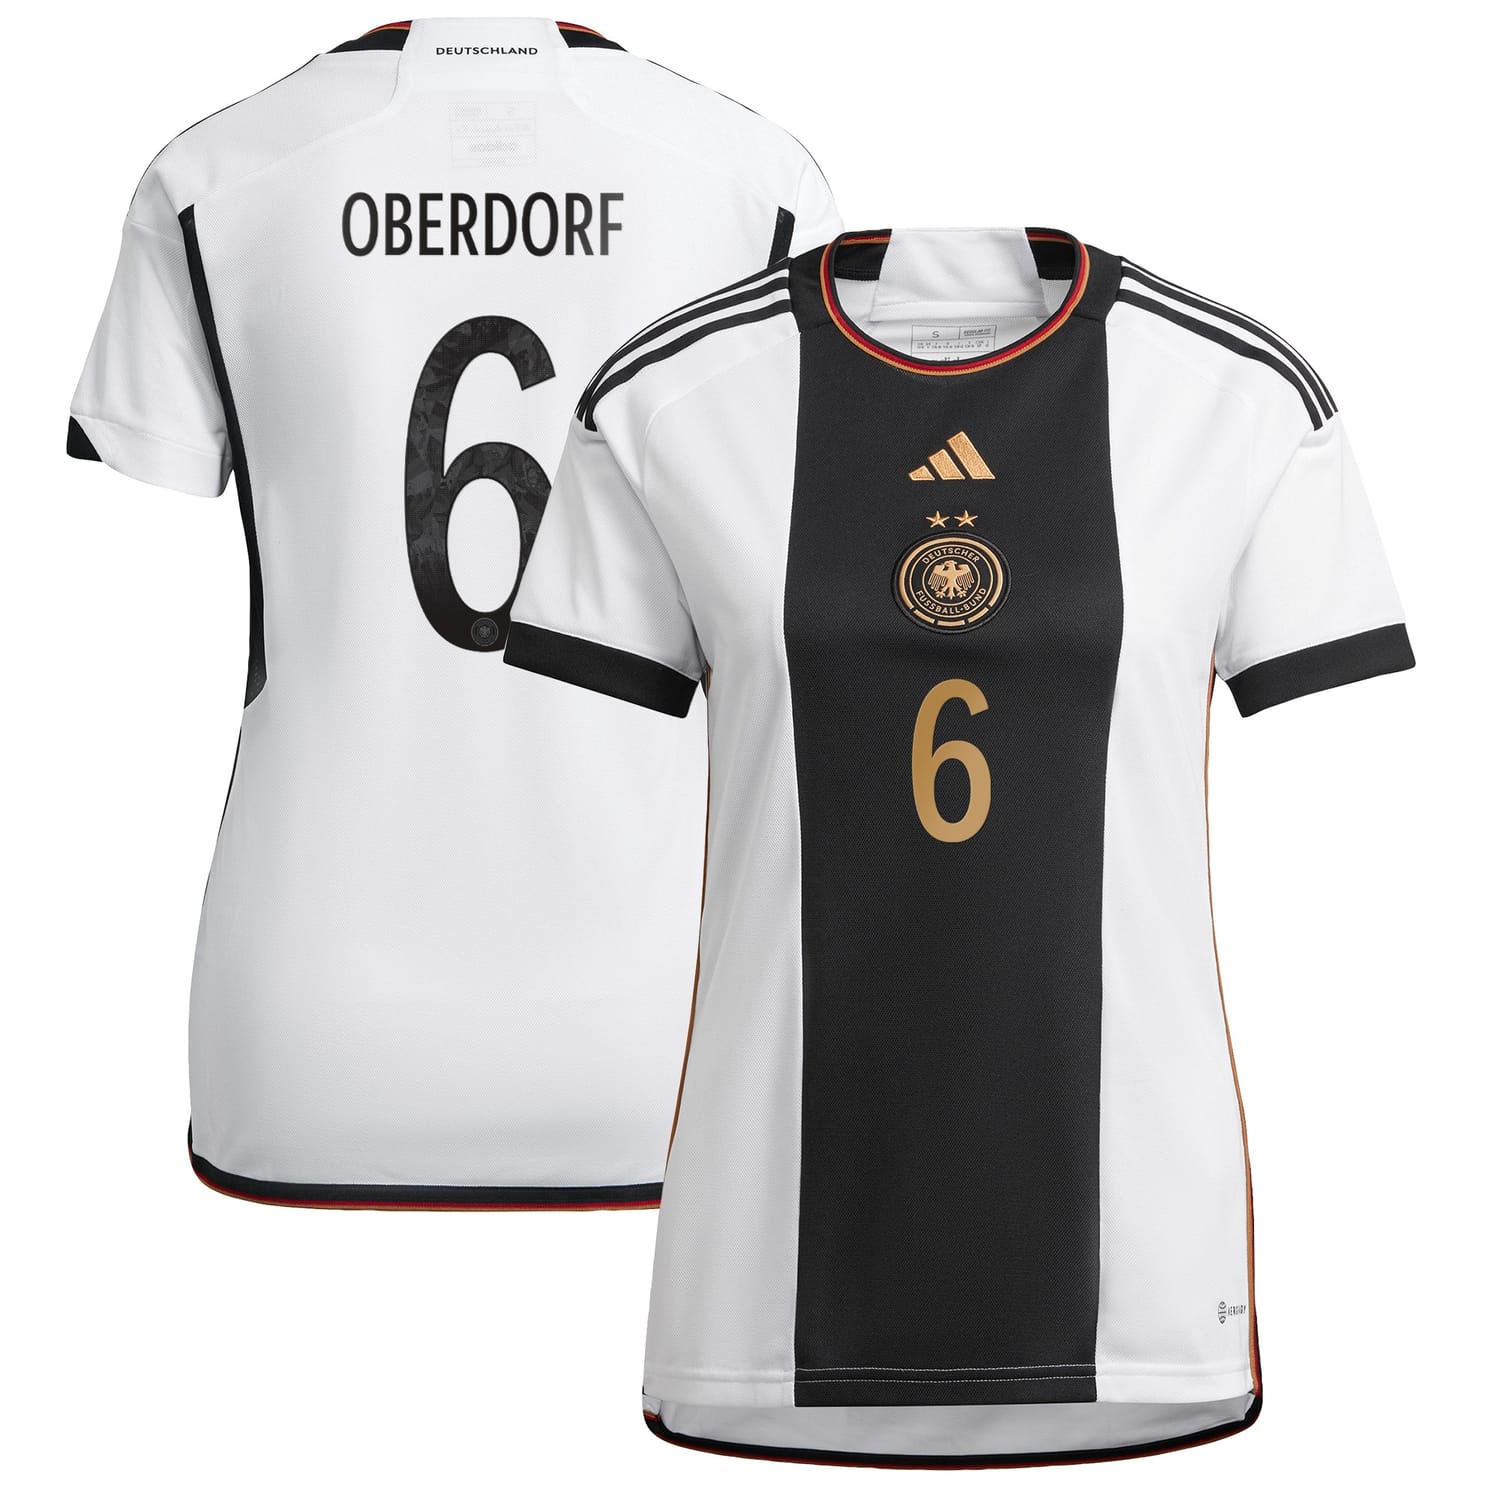 Germany National Team Home Jersey Shirt player Lena Oberdorf 6 printing for Women